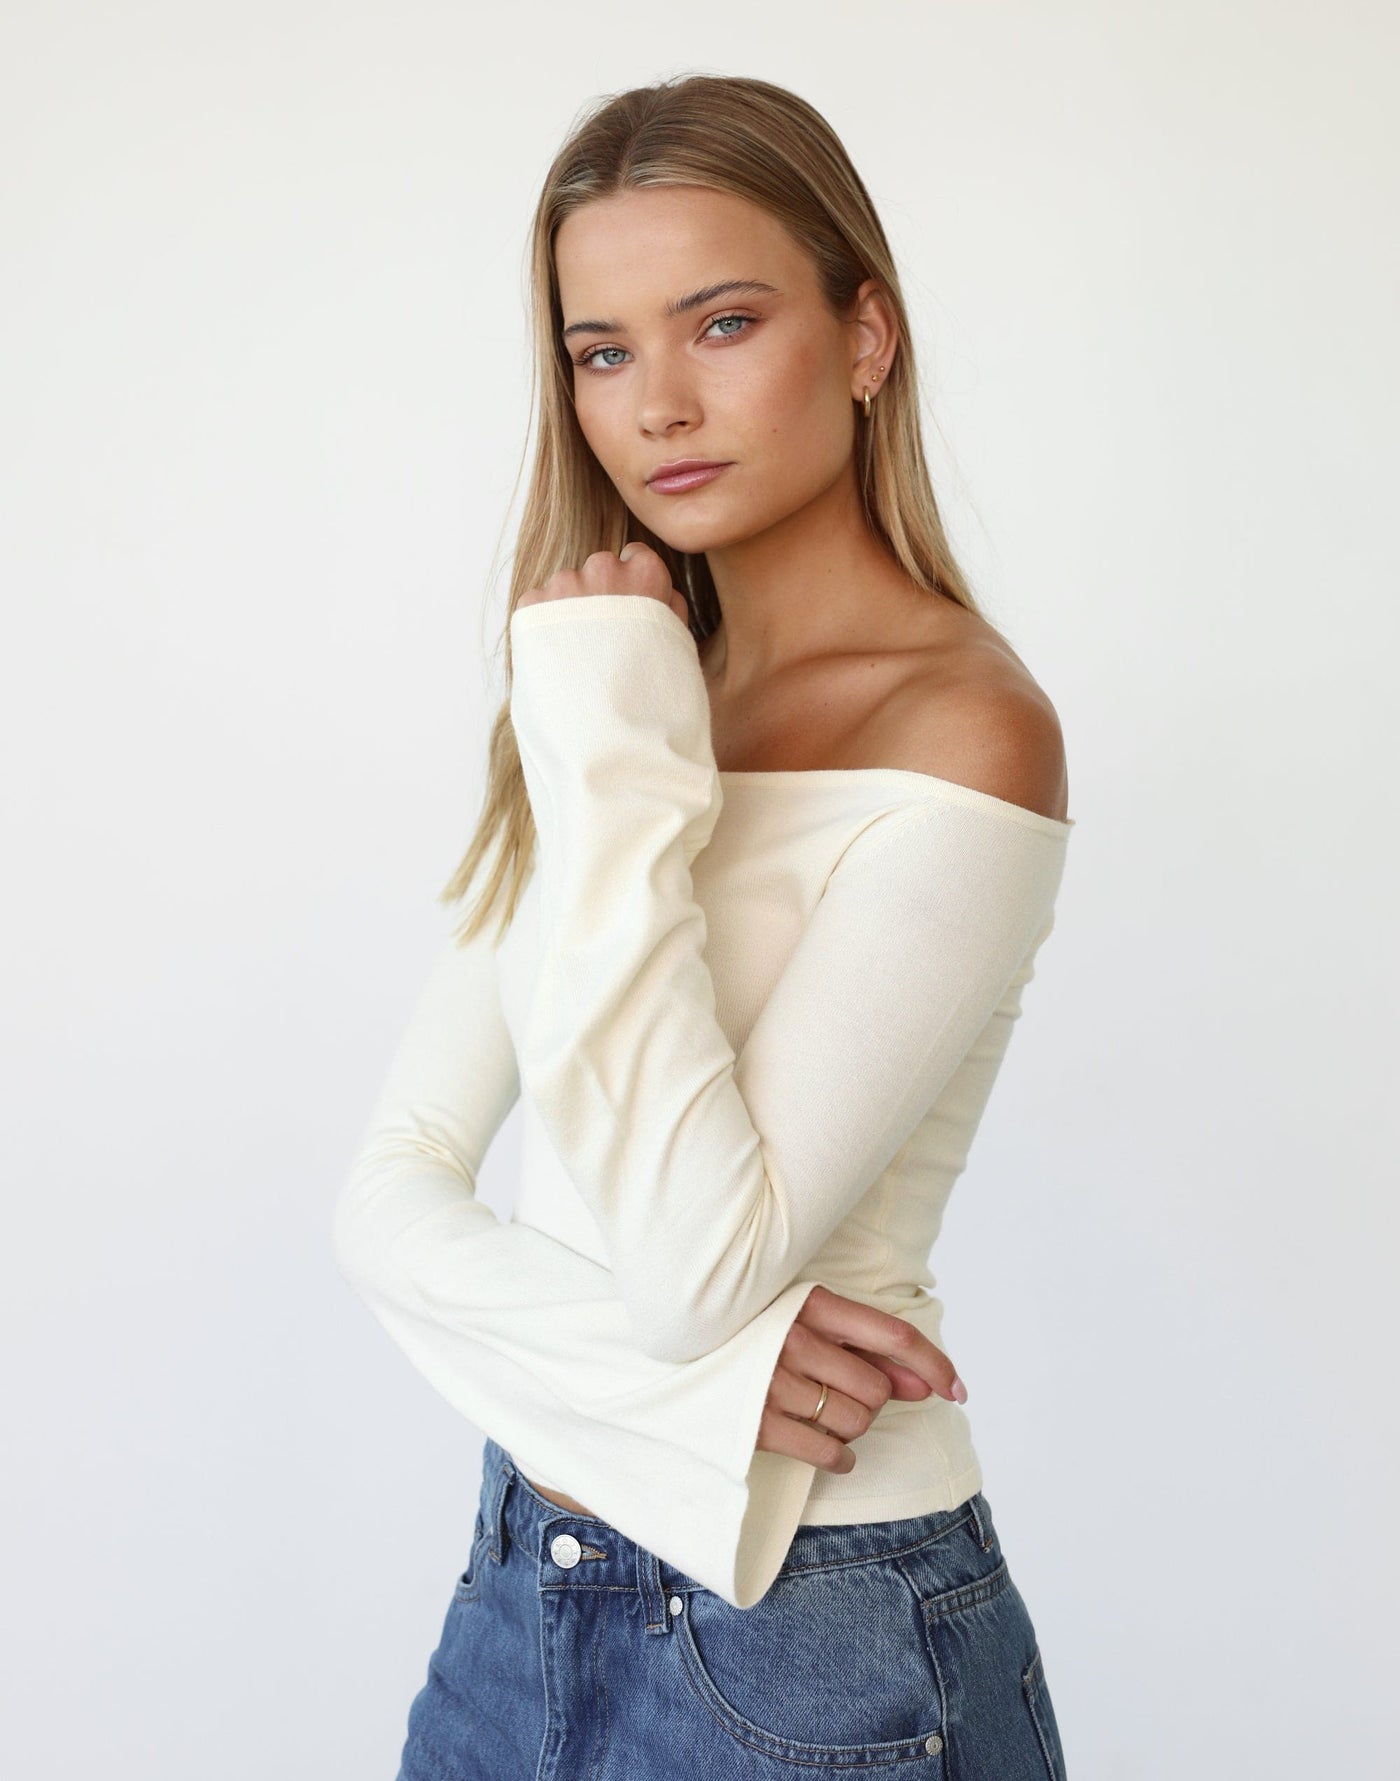 Luna Long Sleeve Knit Top (Off White) - Off The Shoulder Knit Top - Women's Top - Charcoal Clothing